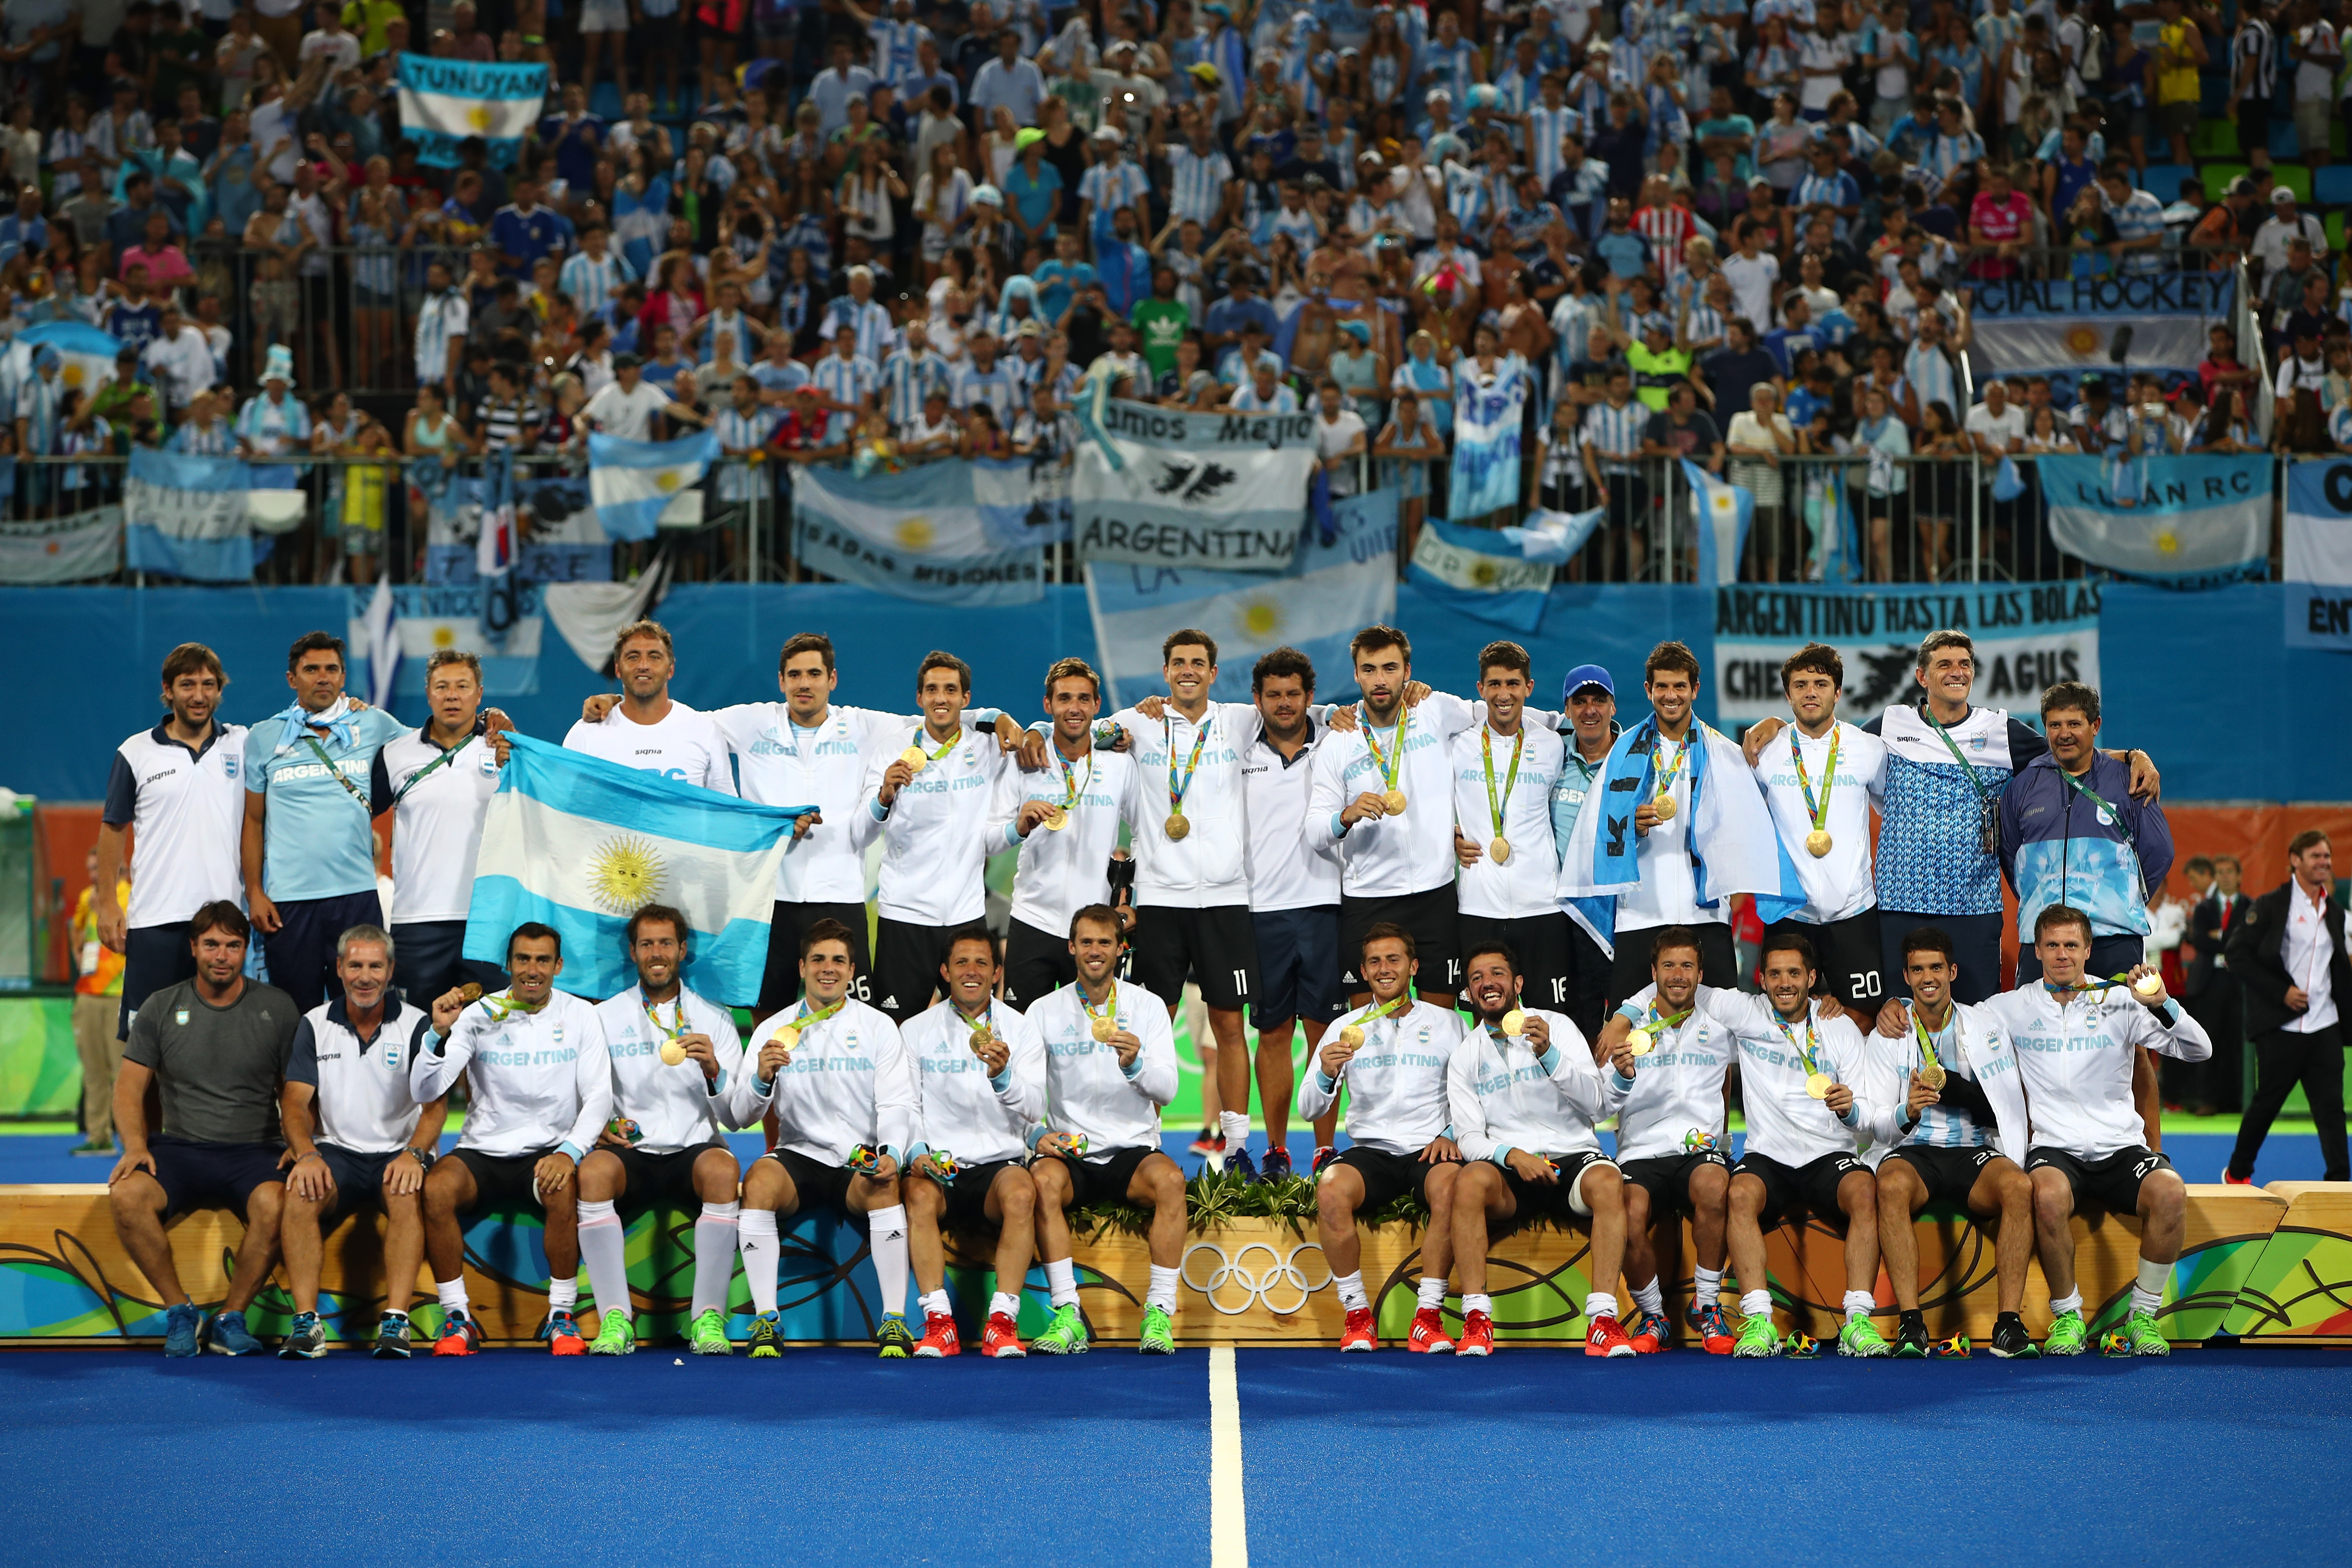 Rio 2016 men’s hockey round-up : Argentina claim historic first Olympic title